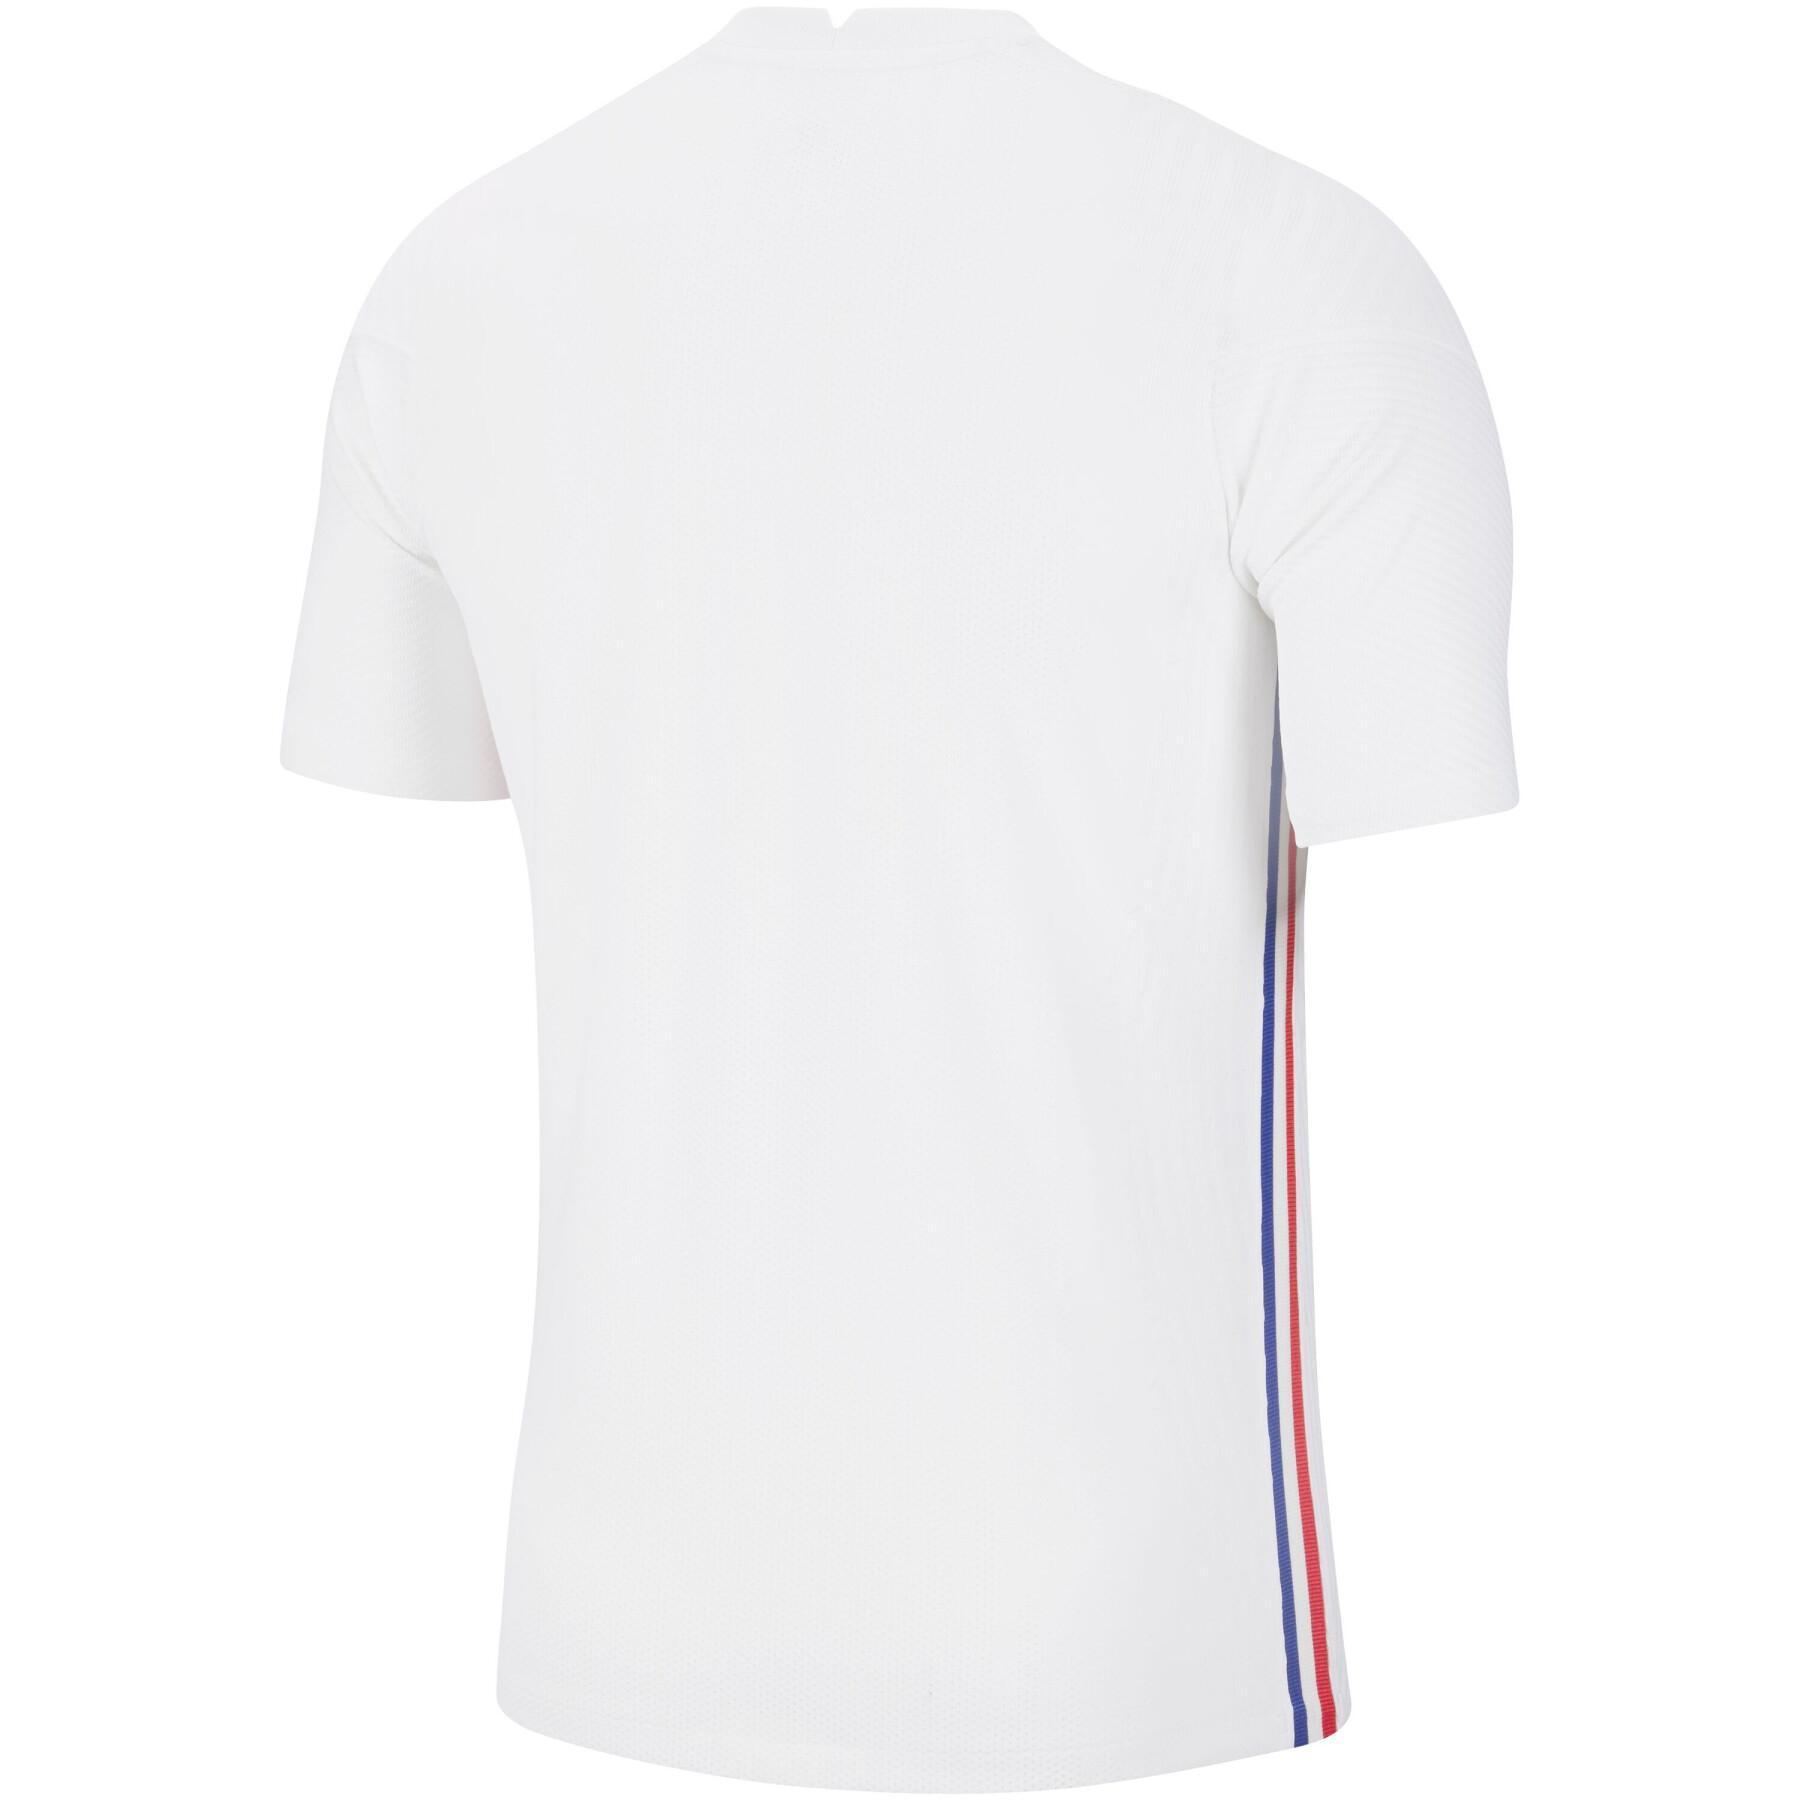 Authentic away jersey France 2020